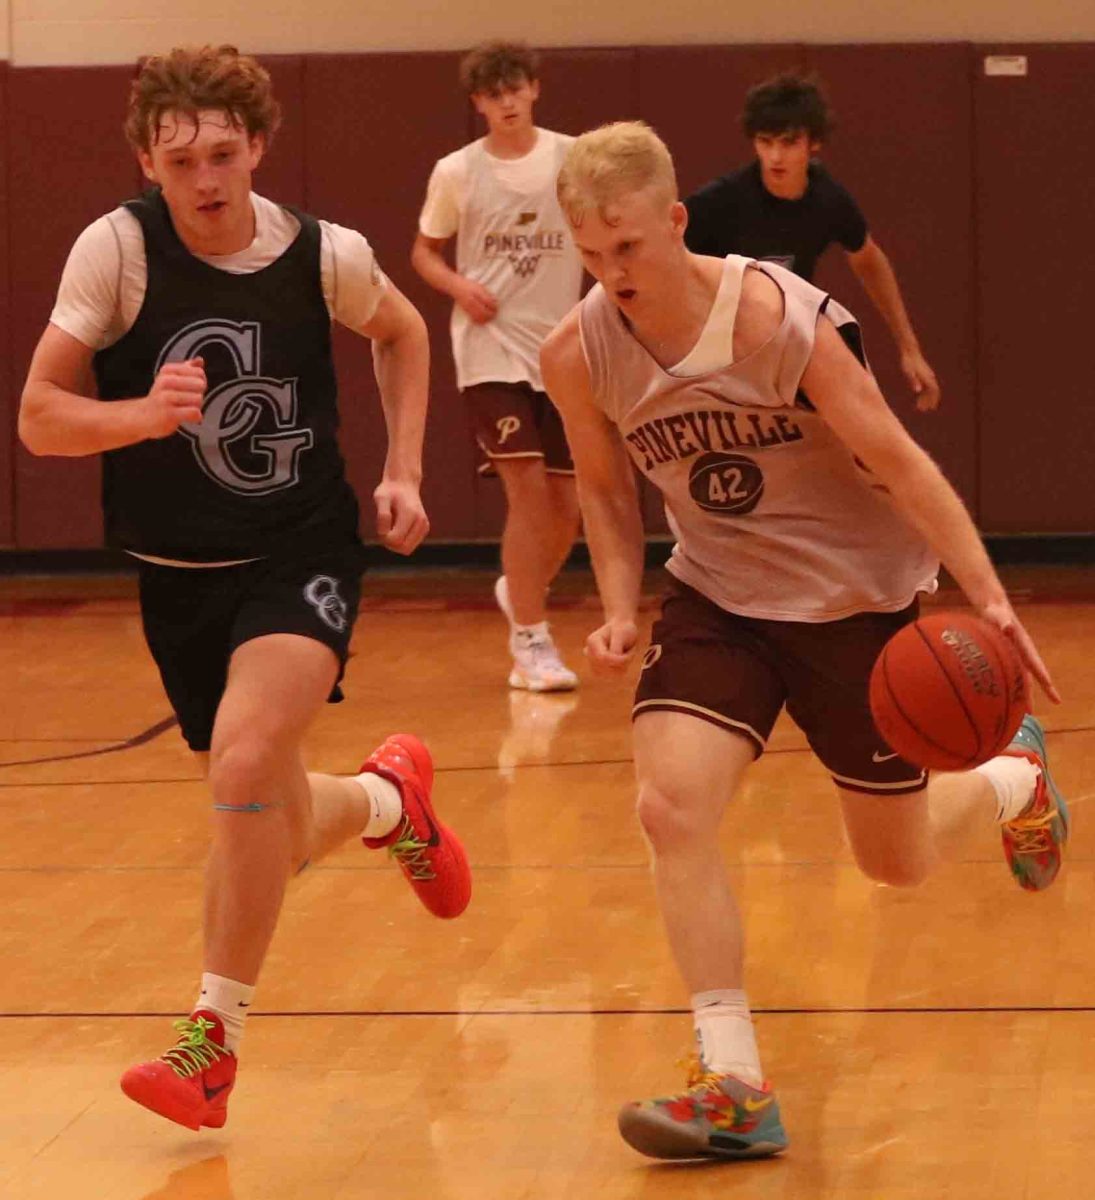 Photo by John Henson
Pineville guard Sawyer Thompson worked to the basket in summer action Tuesday. The 13-1 Lions close summer play this weekend in the Titans/Rockets Shootout.